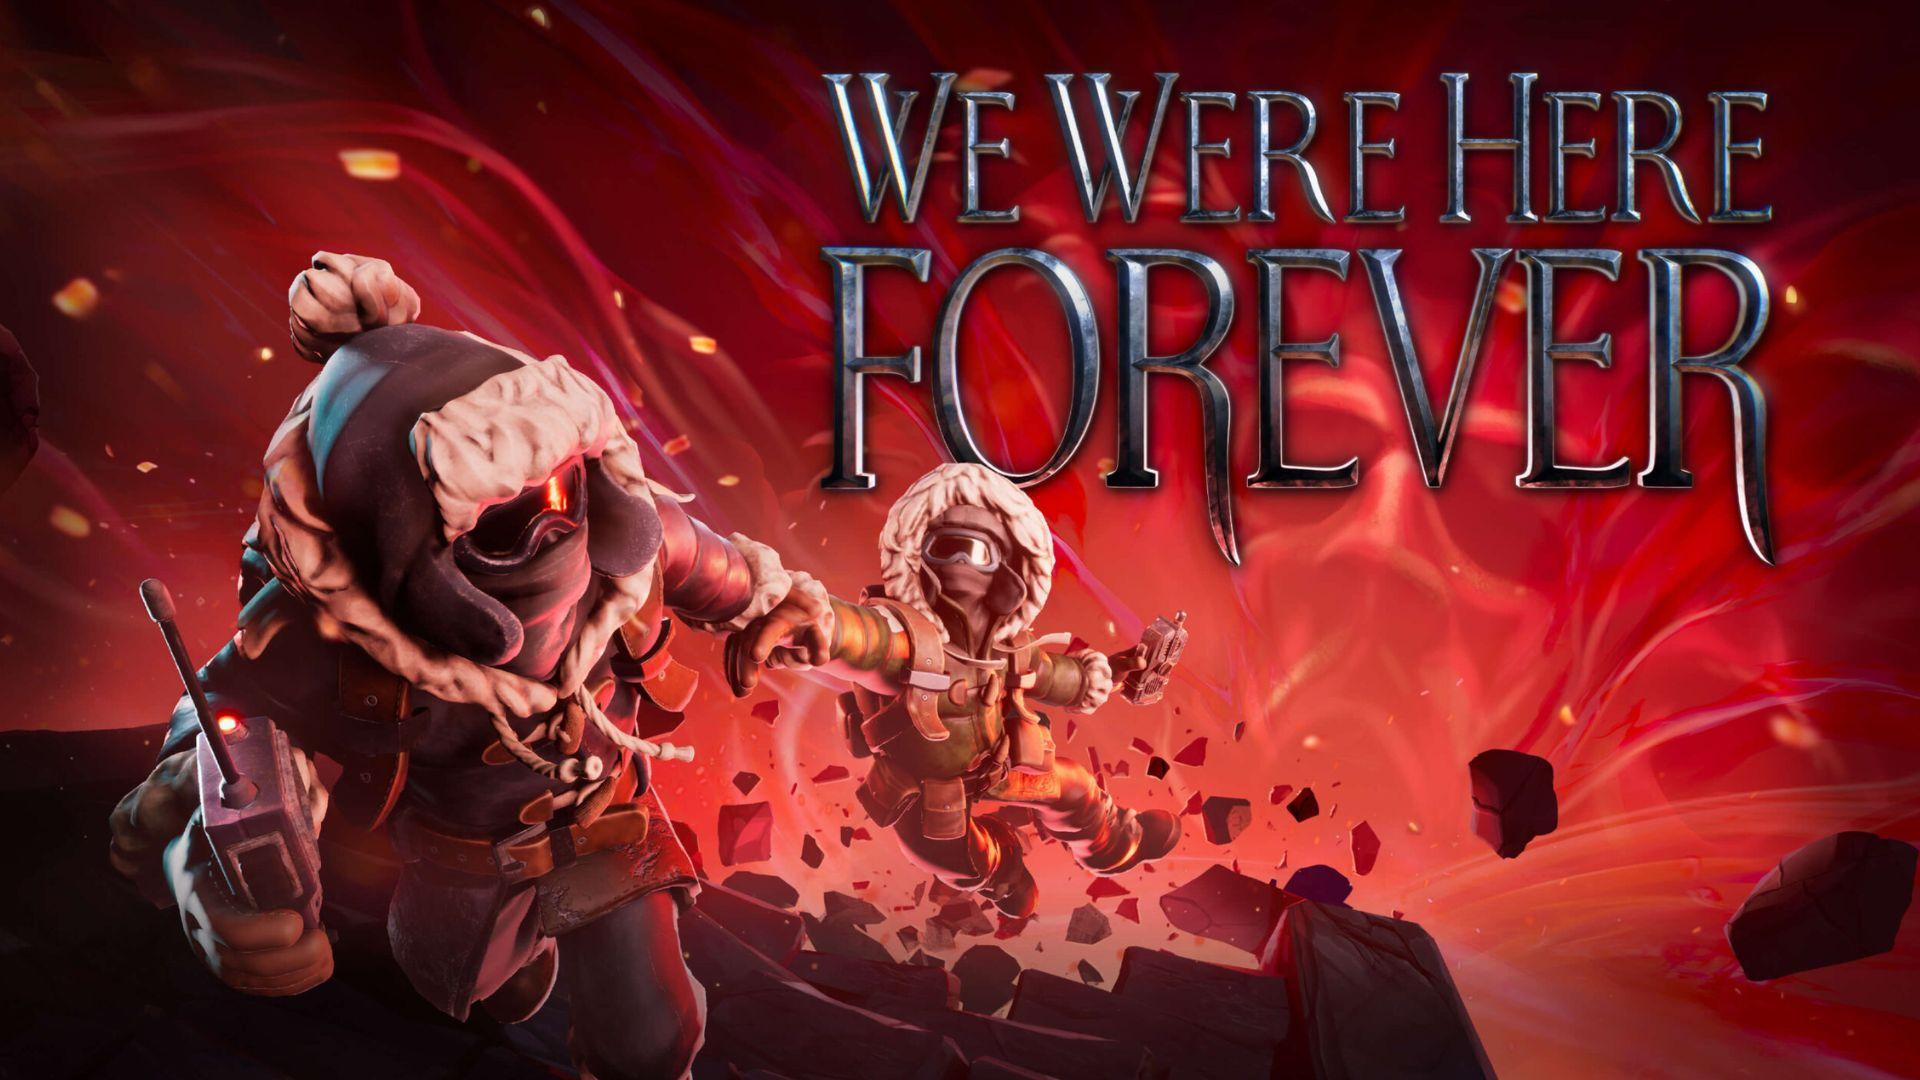 We were here forever